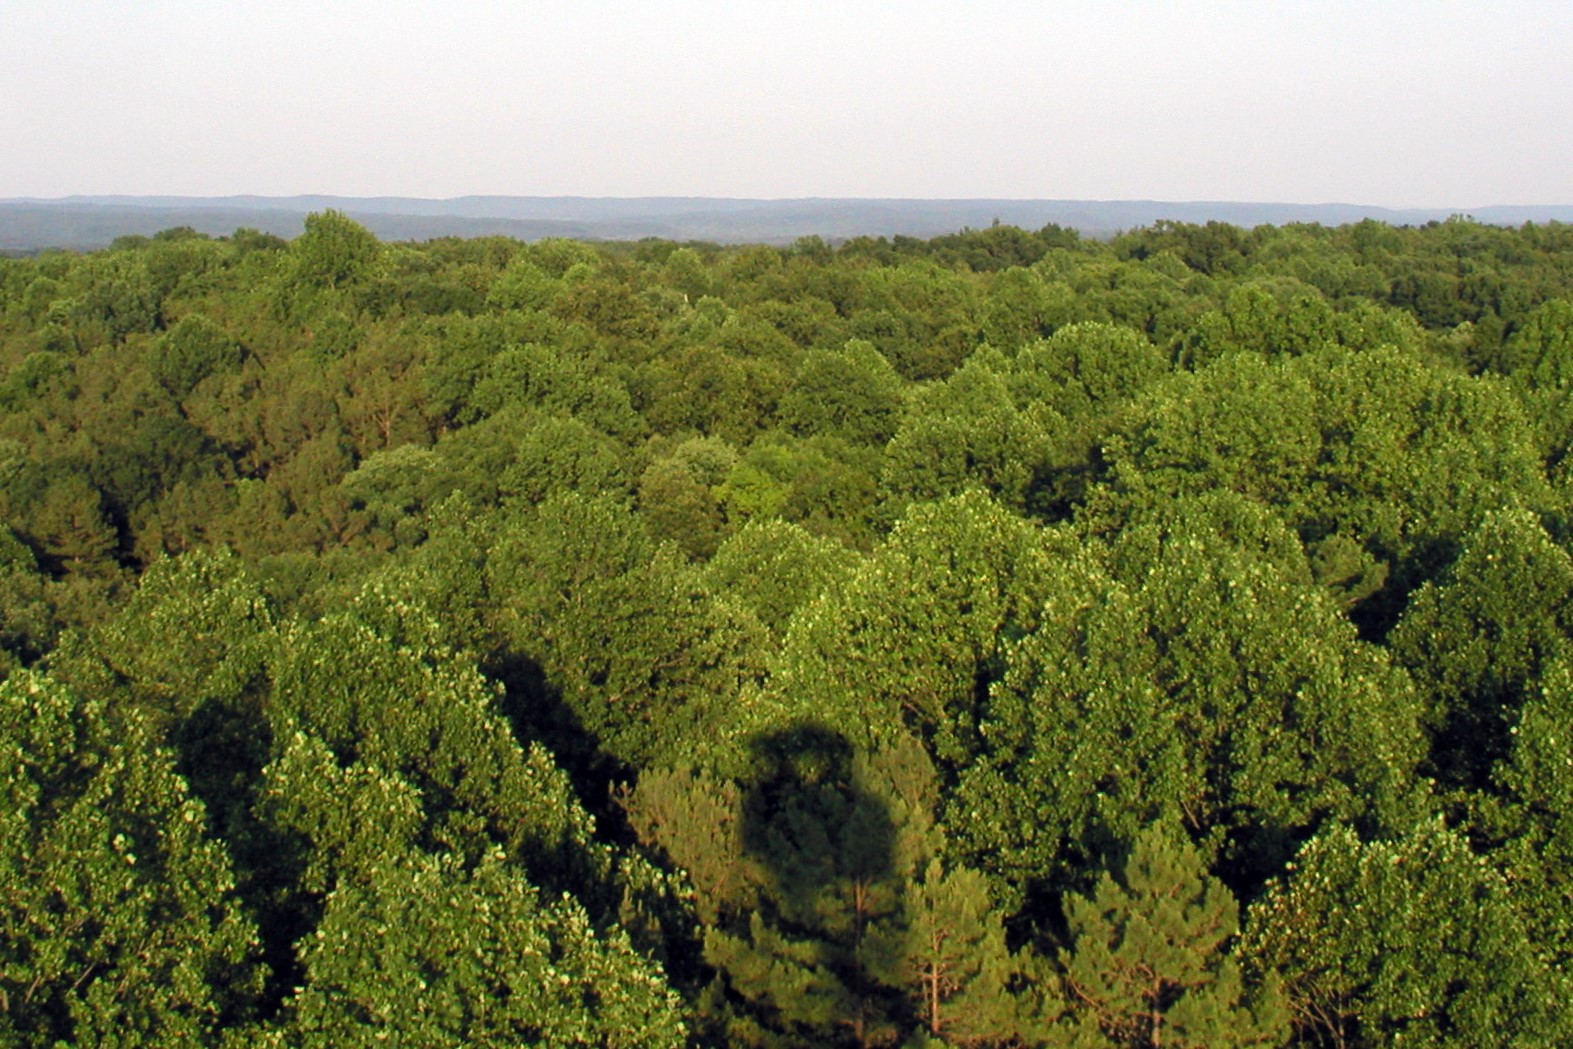 Looking east over the Charles C. Deam Wilderness Area of the Hoosier National Forest from the Hickory Ridge Fire Tower.